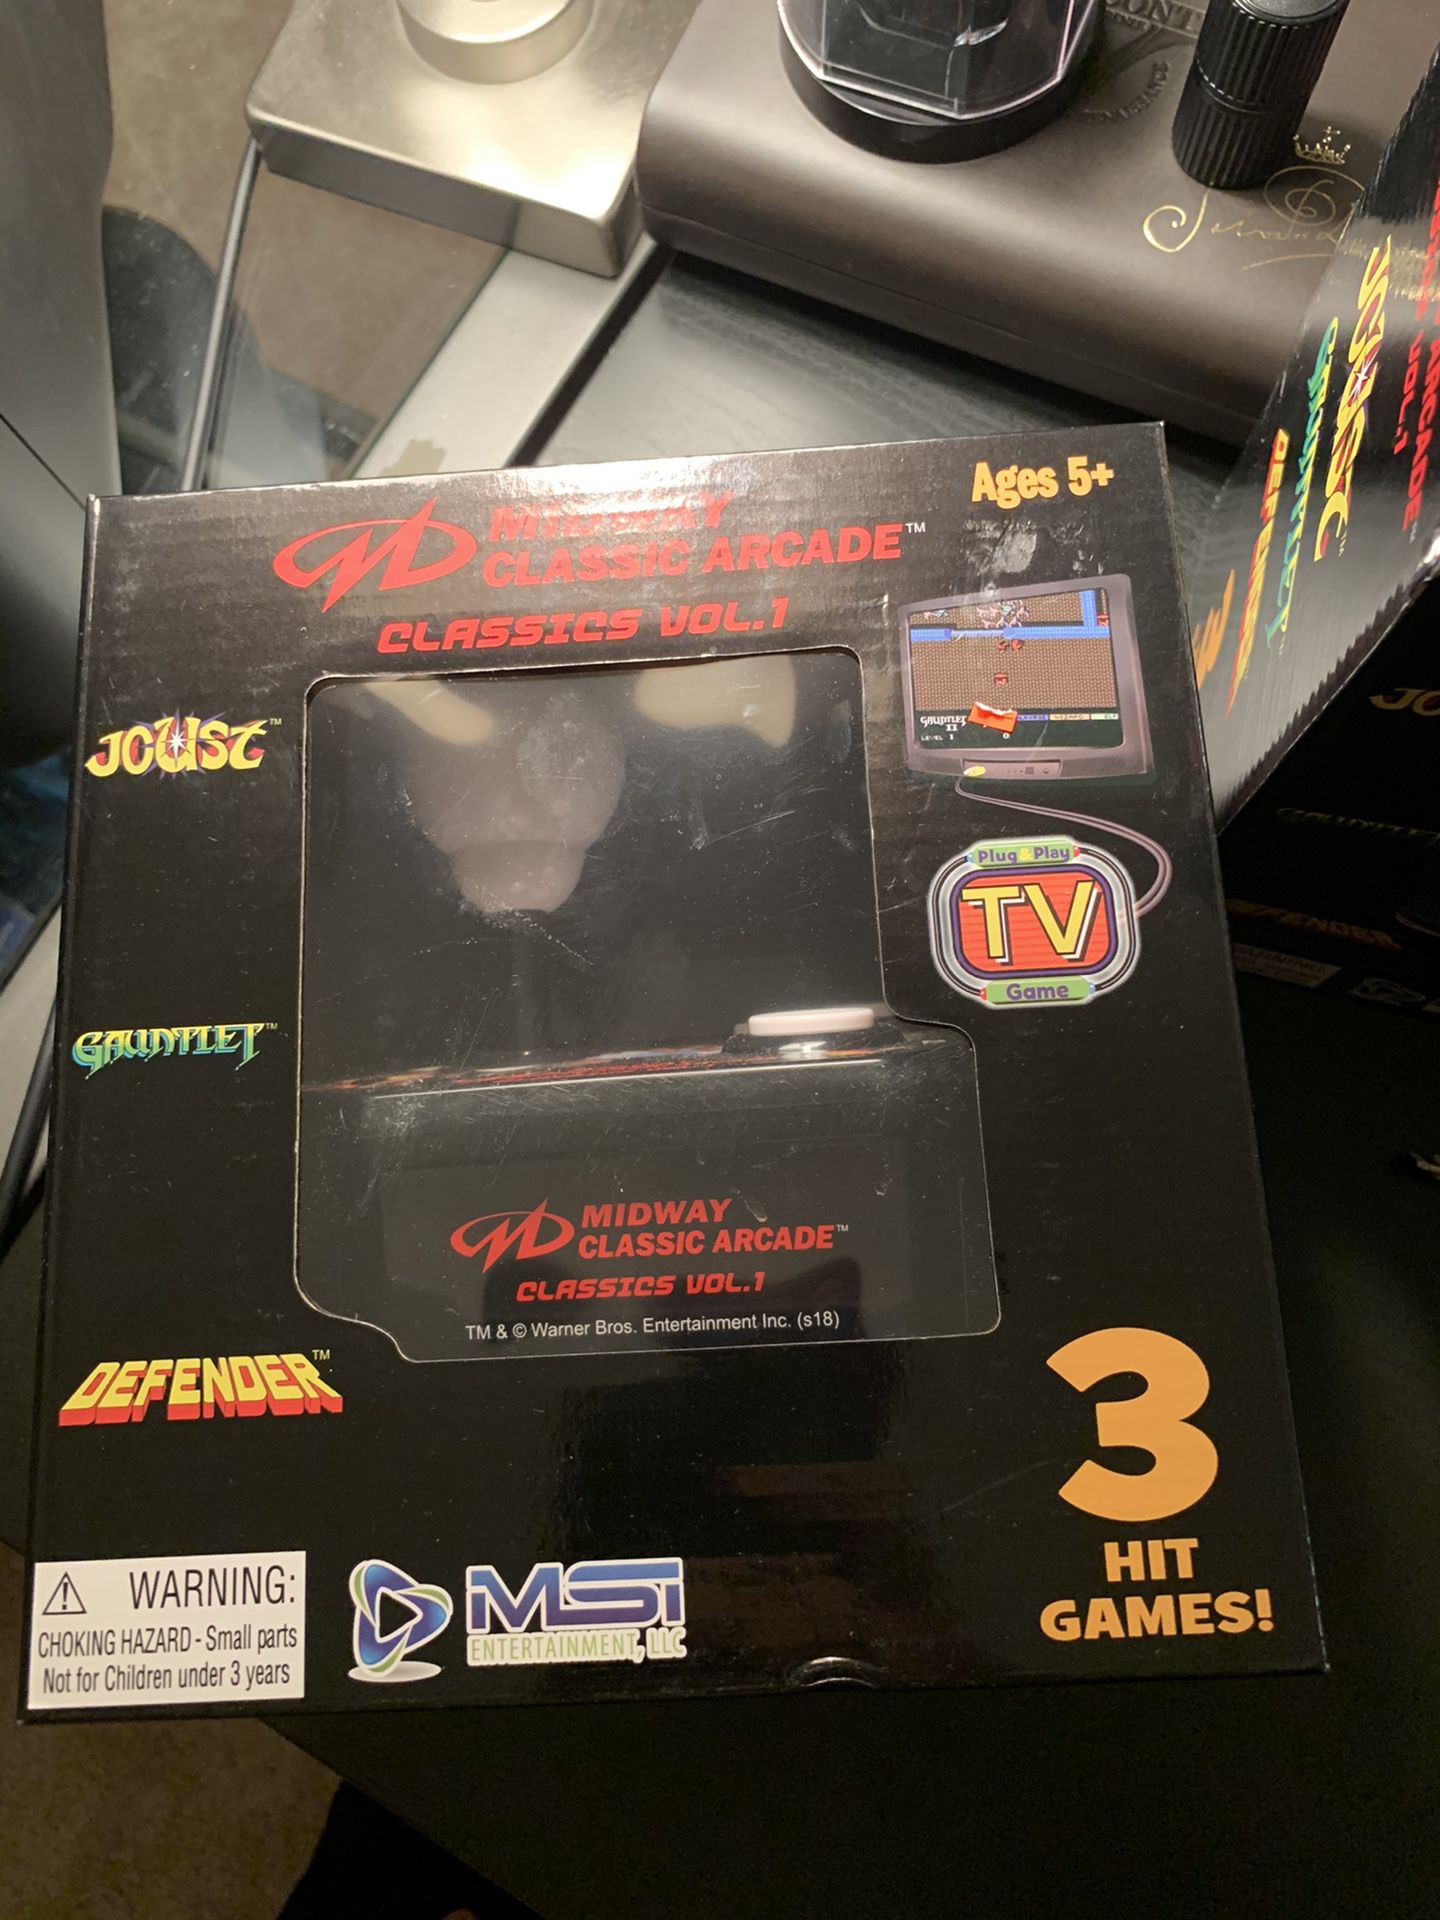 Midway classic arcade games volume 1